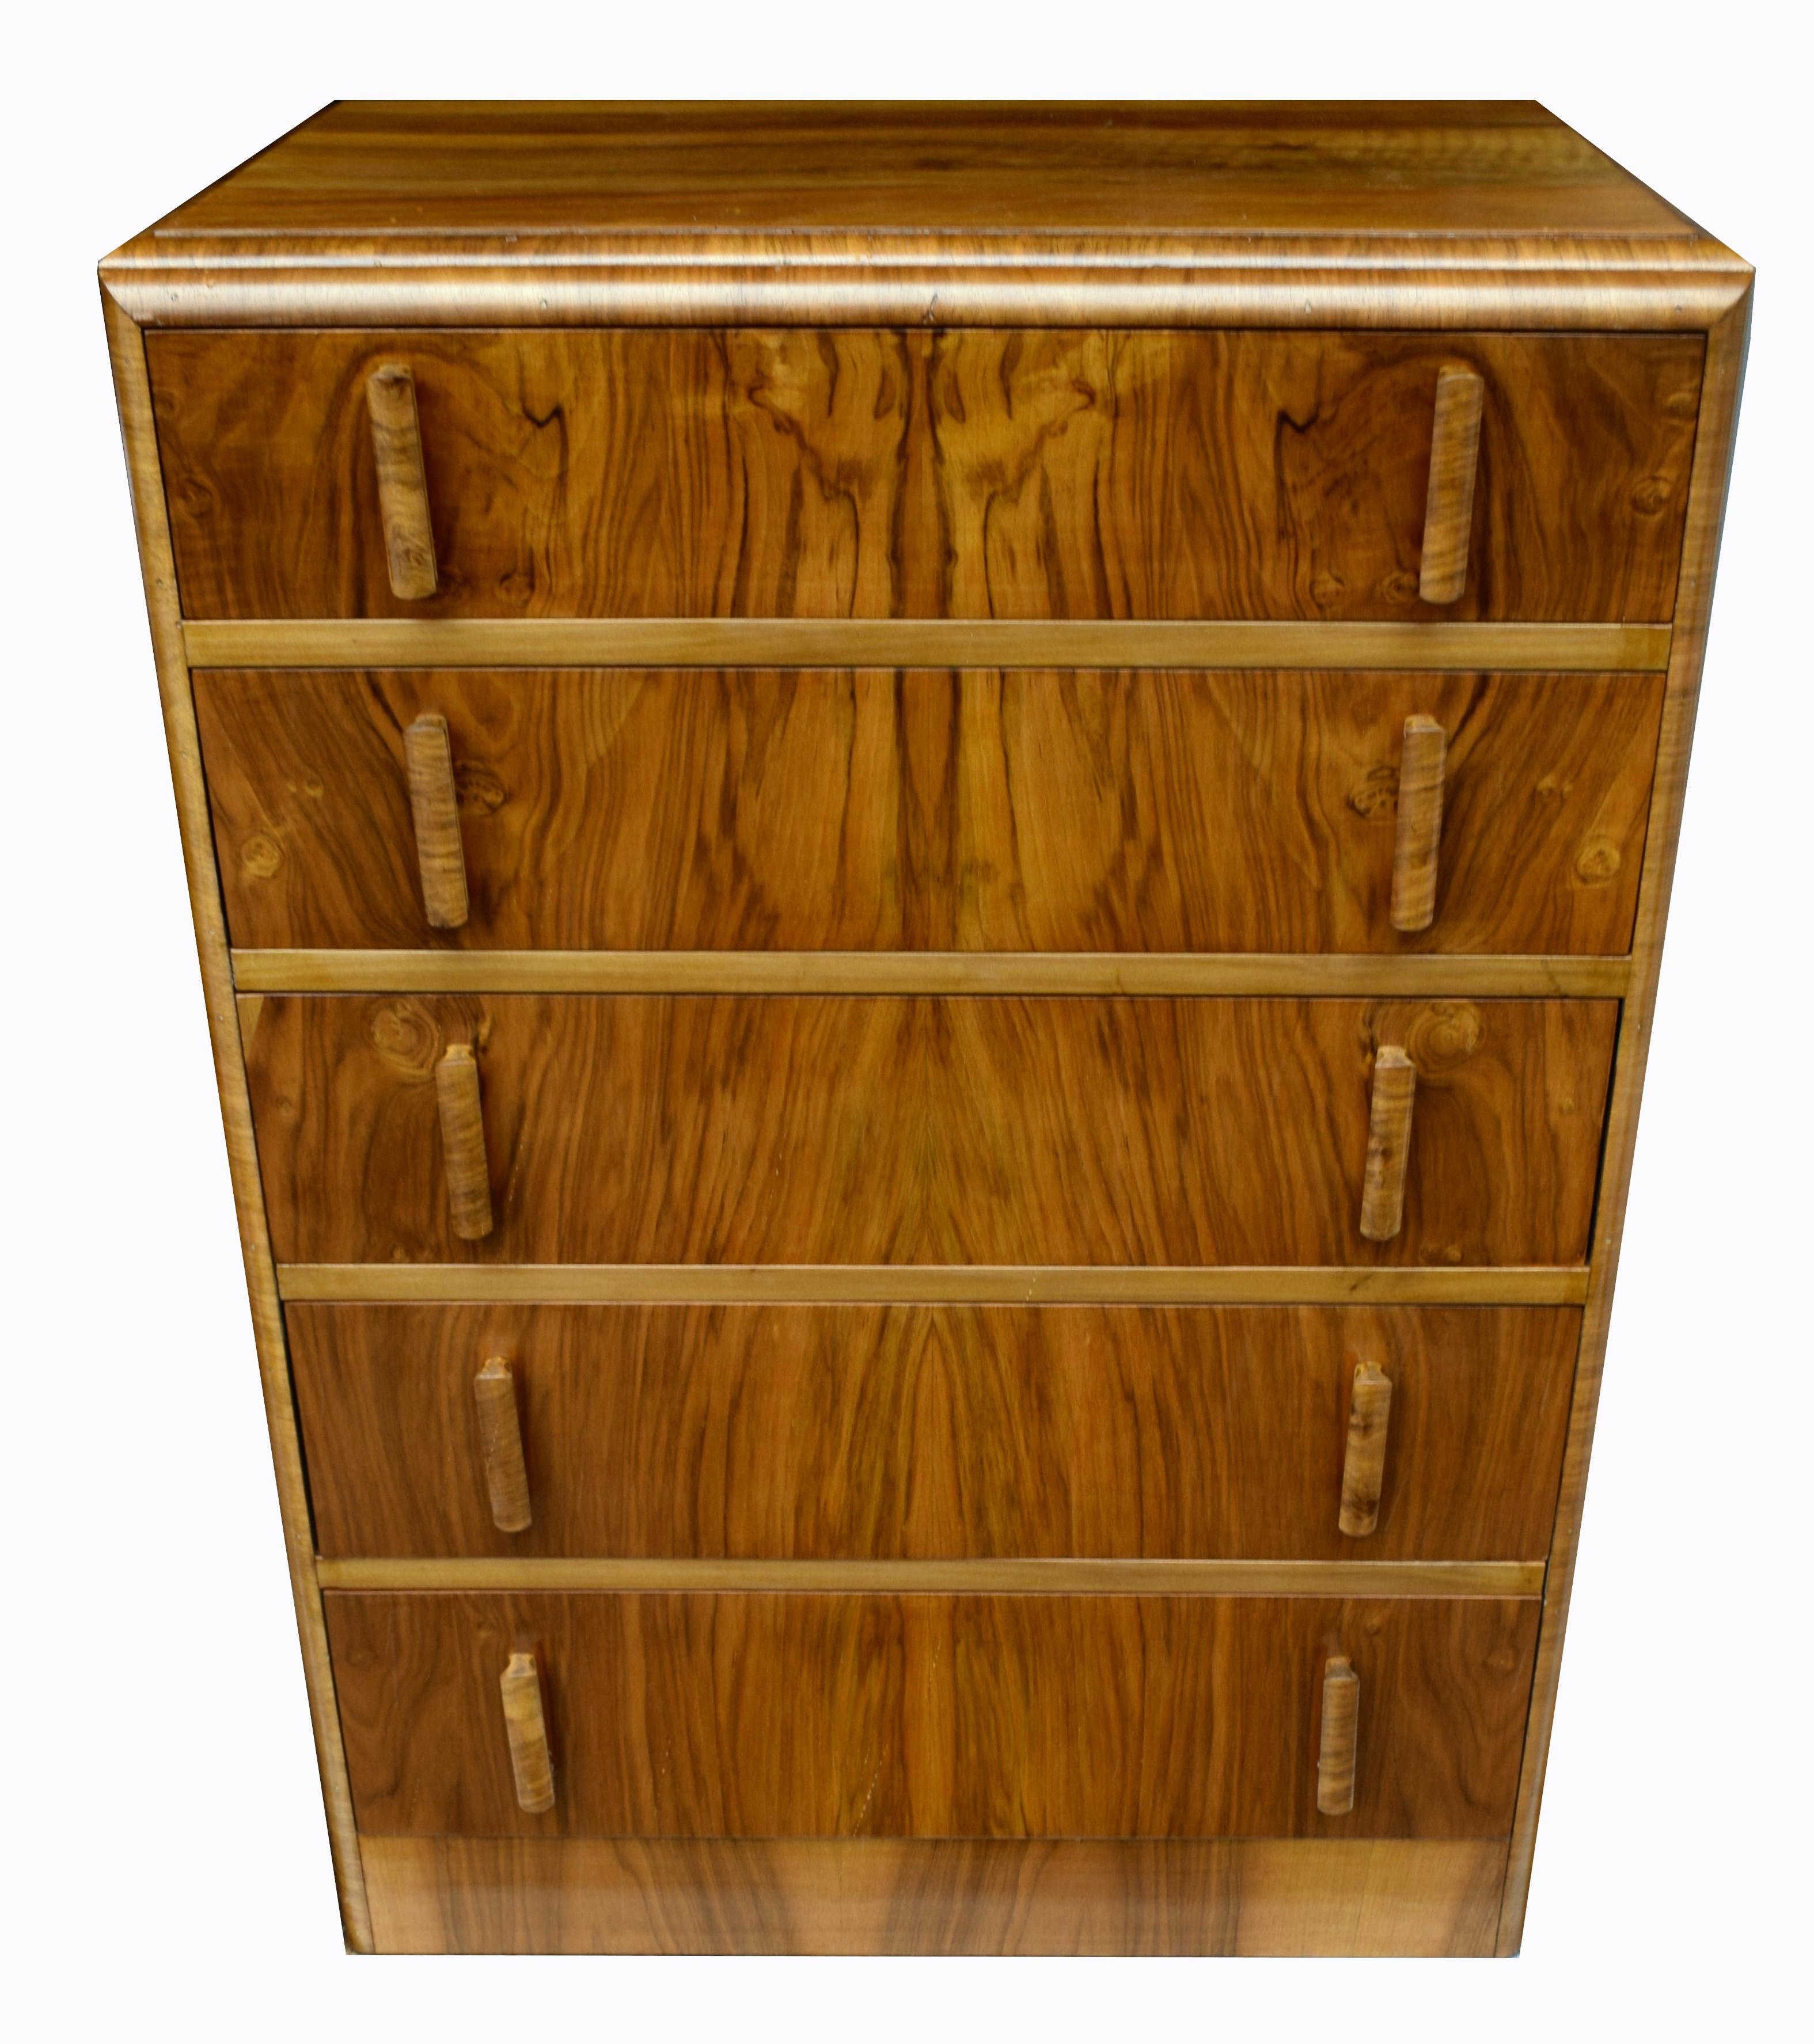 For your consideration is this extremely stylish and original Art Deco chest of drawers which dates to early 1930s and originates from England. Five very generously sized drawers which are veneered in book paged walnut figured veneers. Each drawer